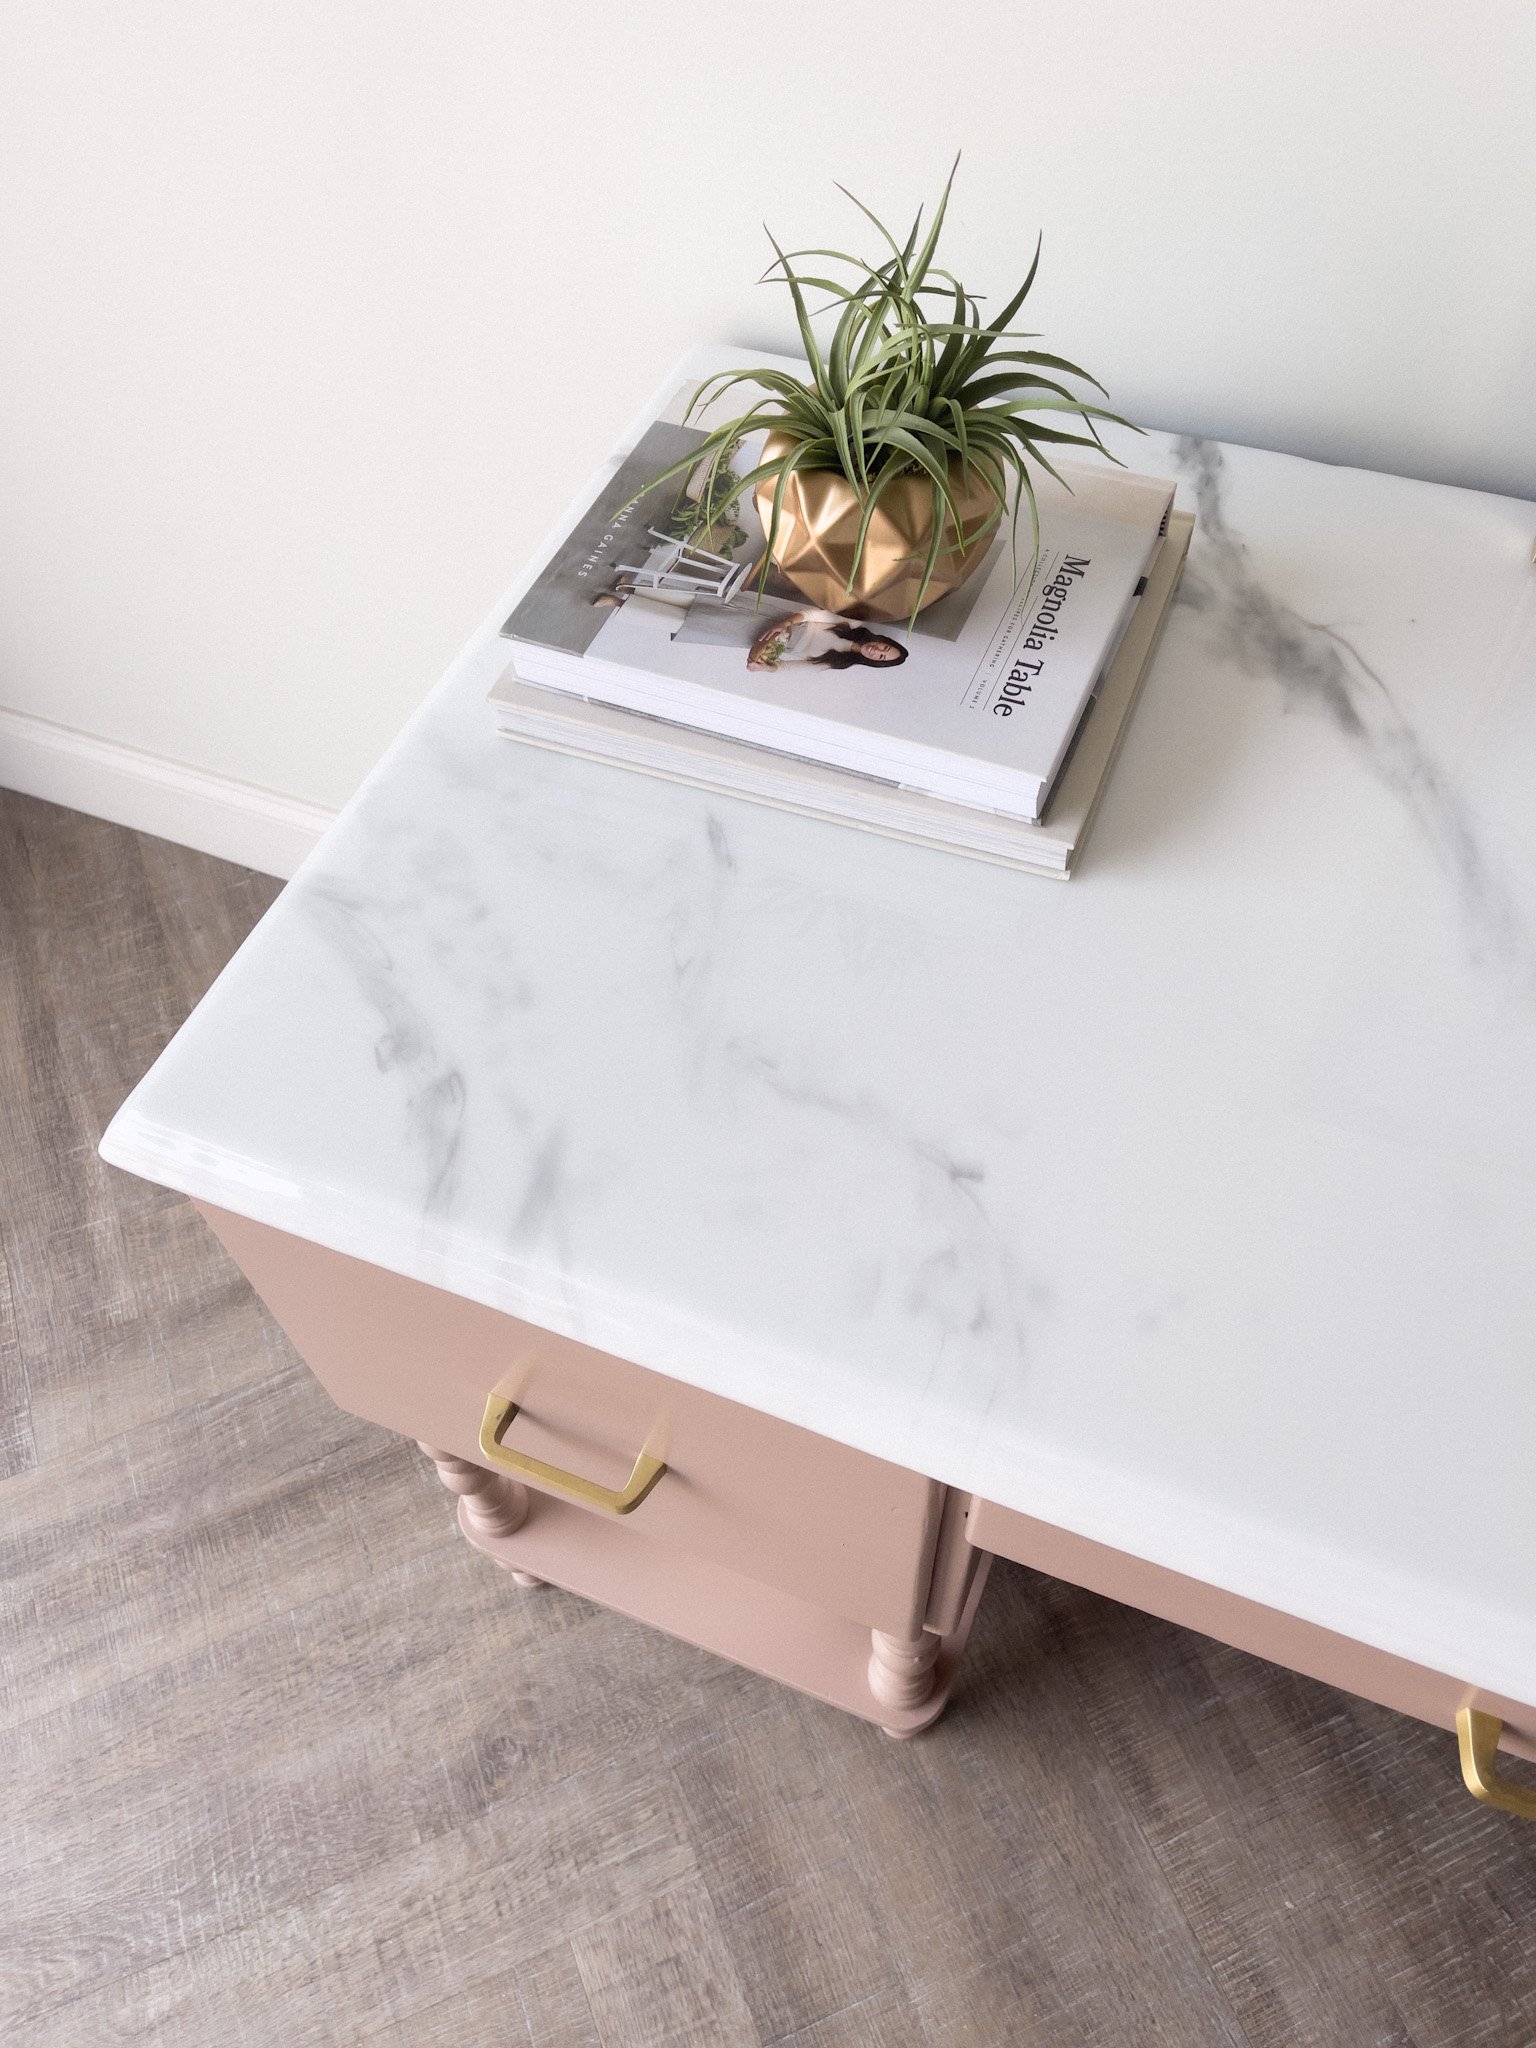 Using Epoxy to Create a Faux Marble Top: Glam Desk Makeover —  prettydistressed